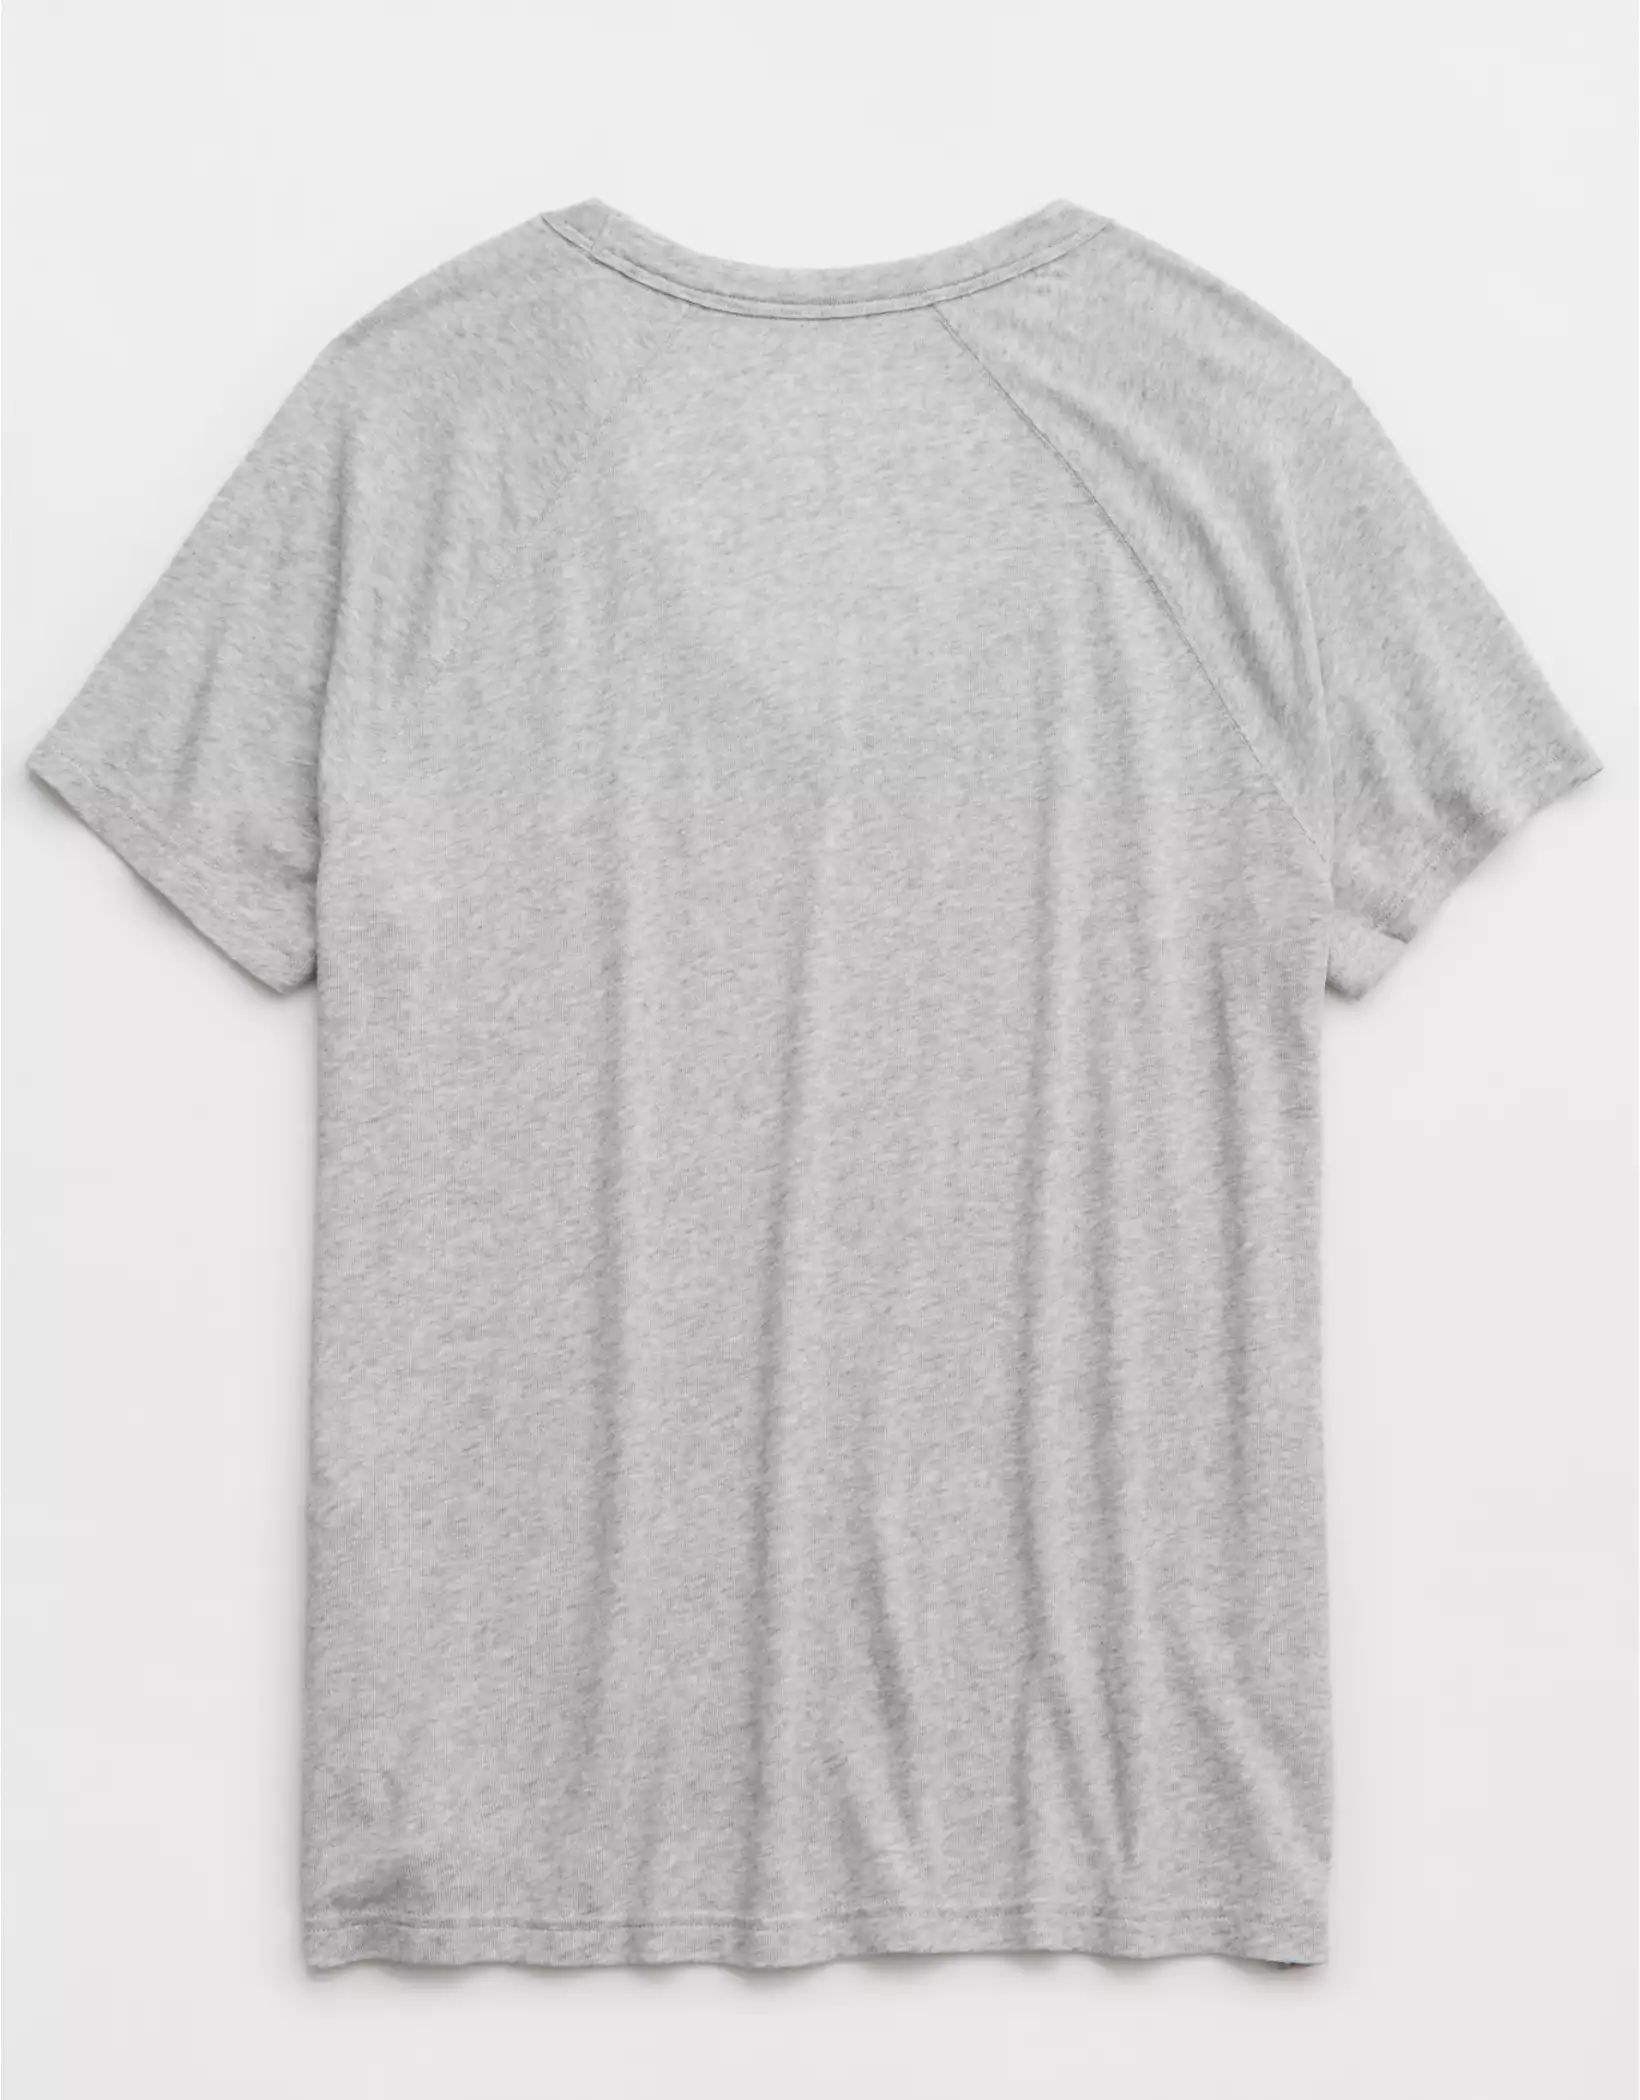 OFFLINE By Aerie Bouncy Cotton V-Neck T-Shirt | Aerie